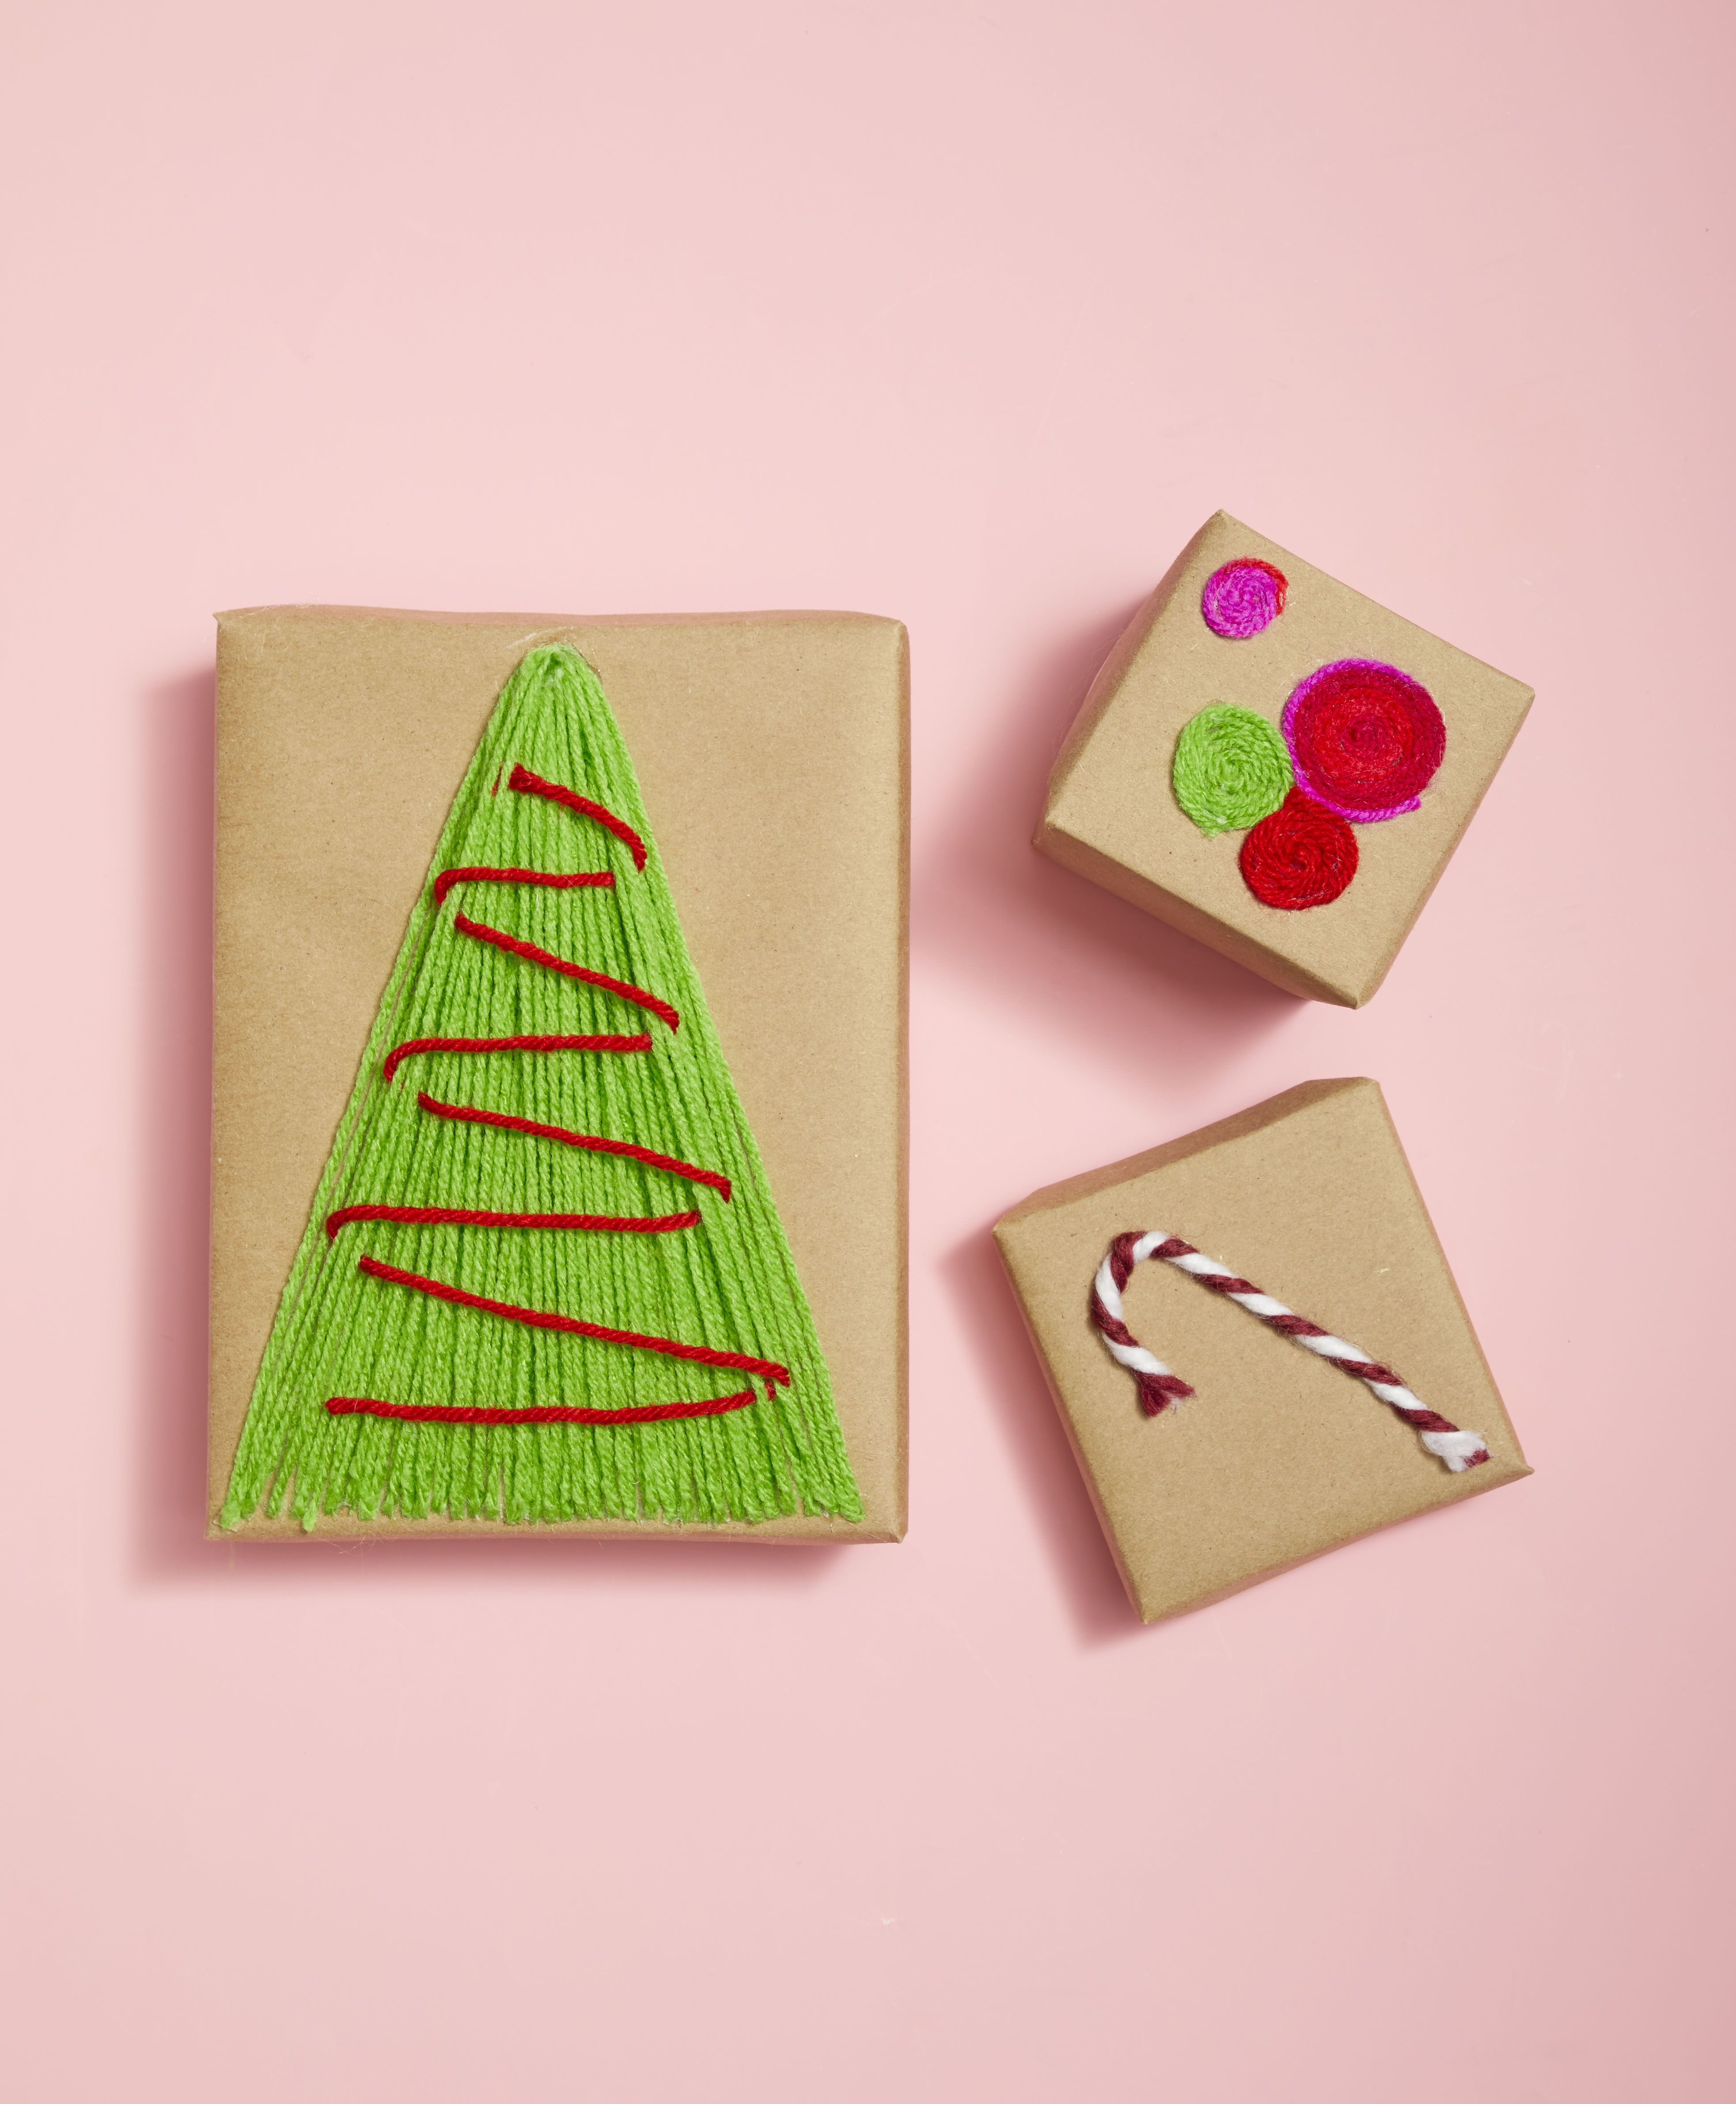 52 Easy Gift Wrapping Ideas for Christmas — How to Wrap a Gift